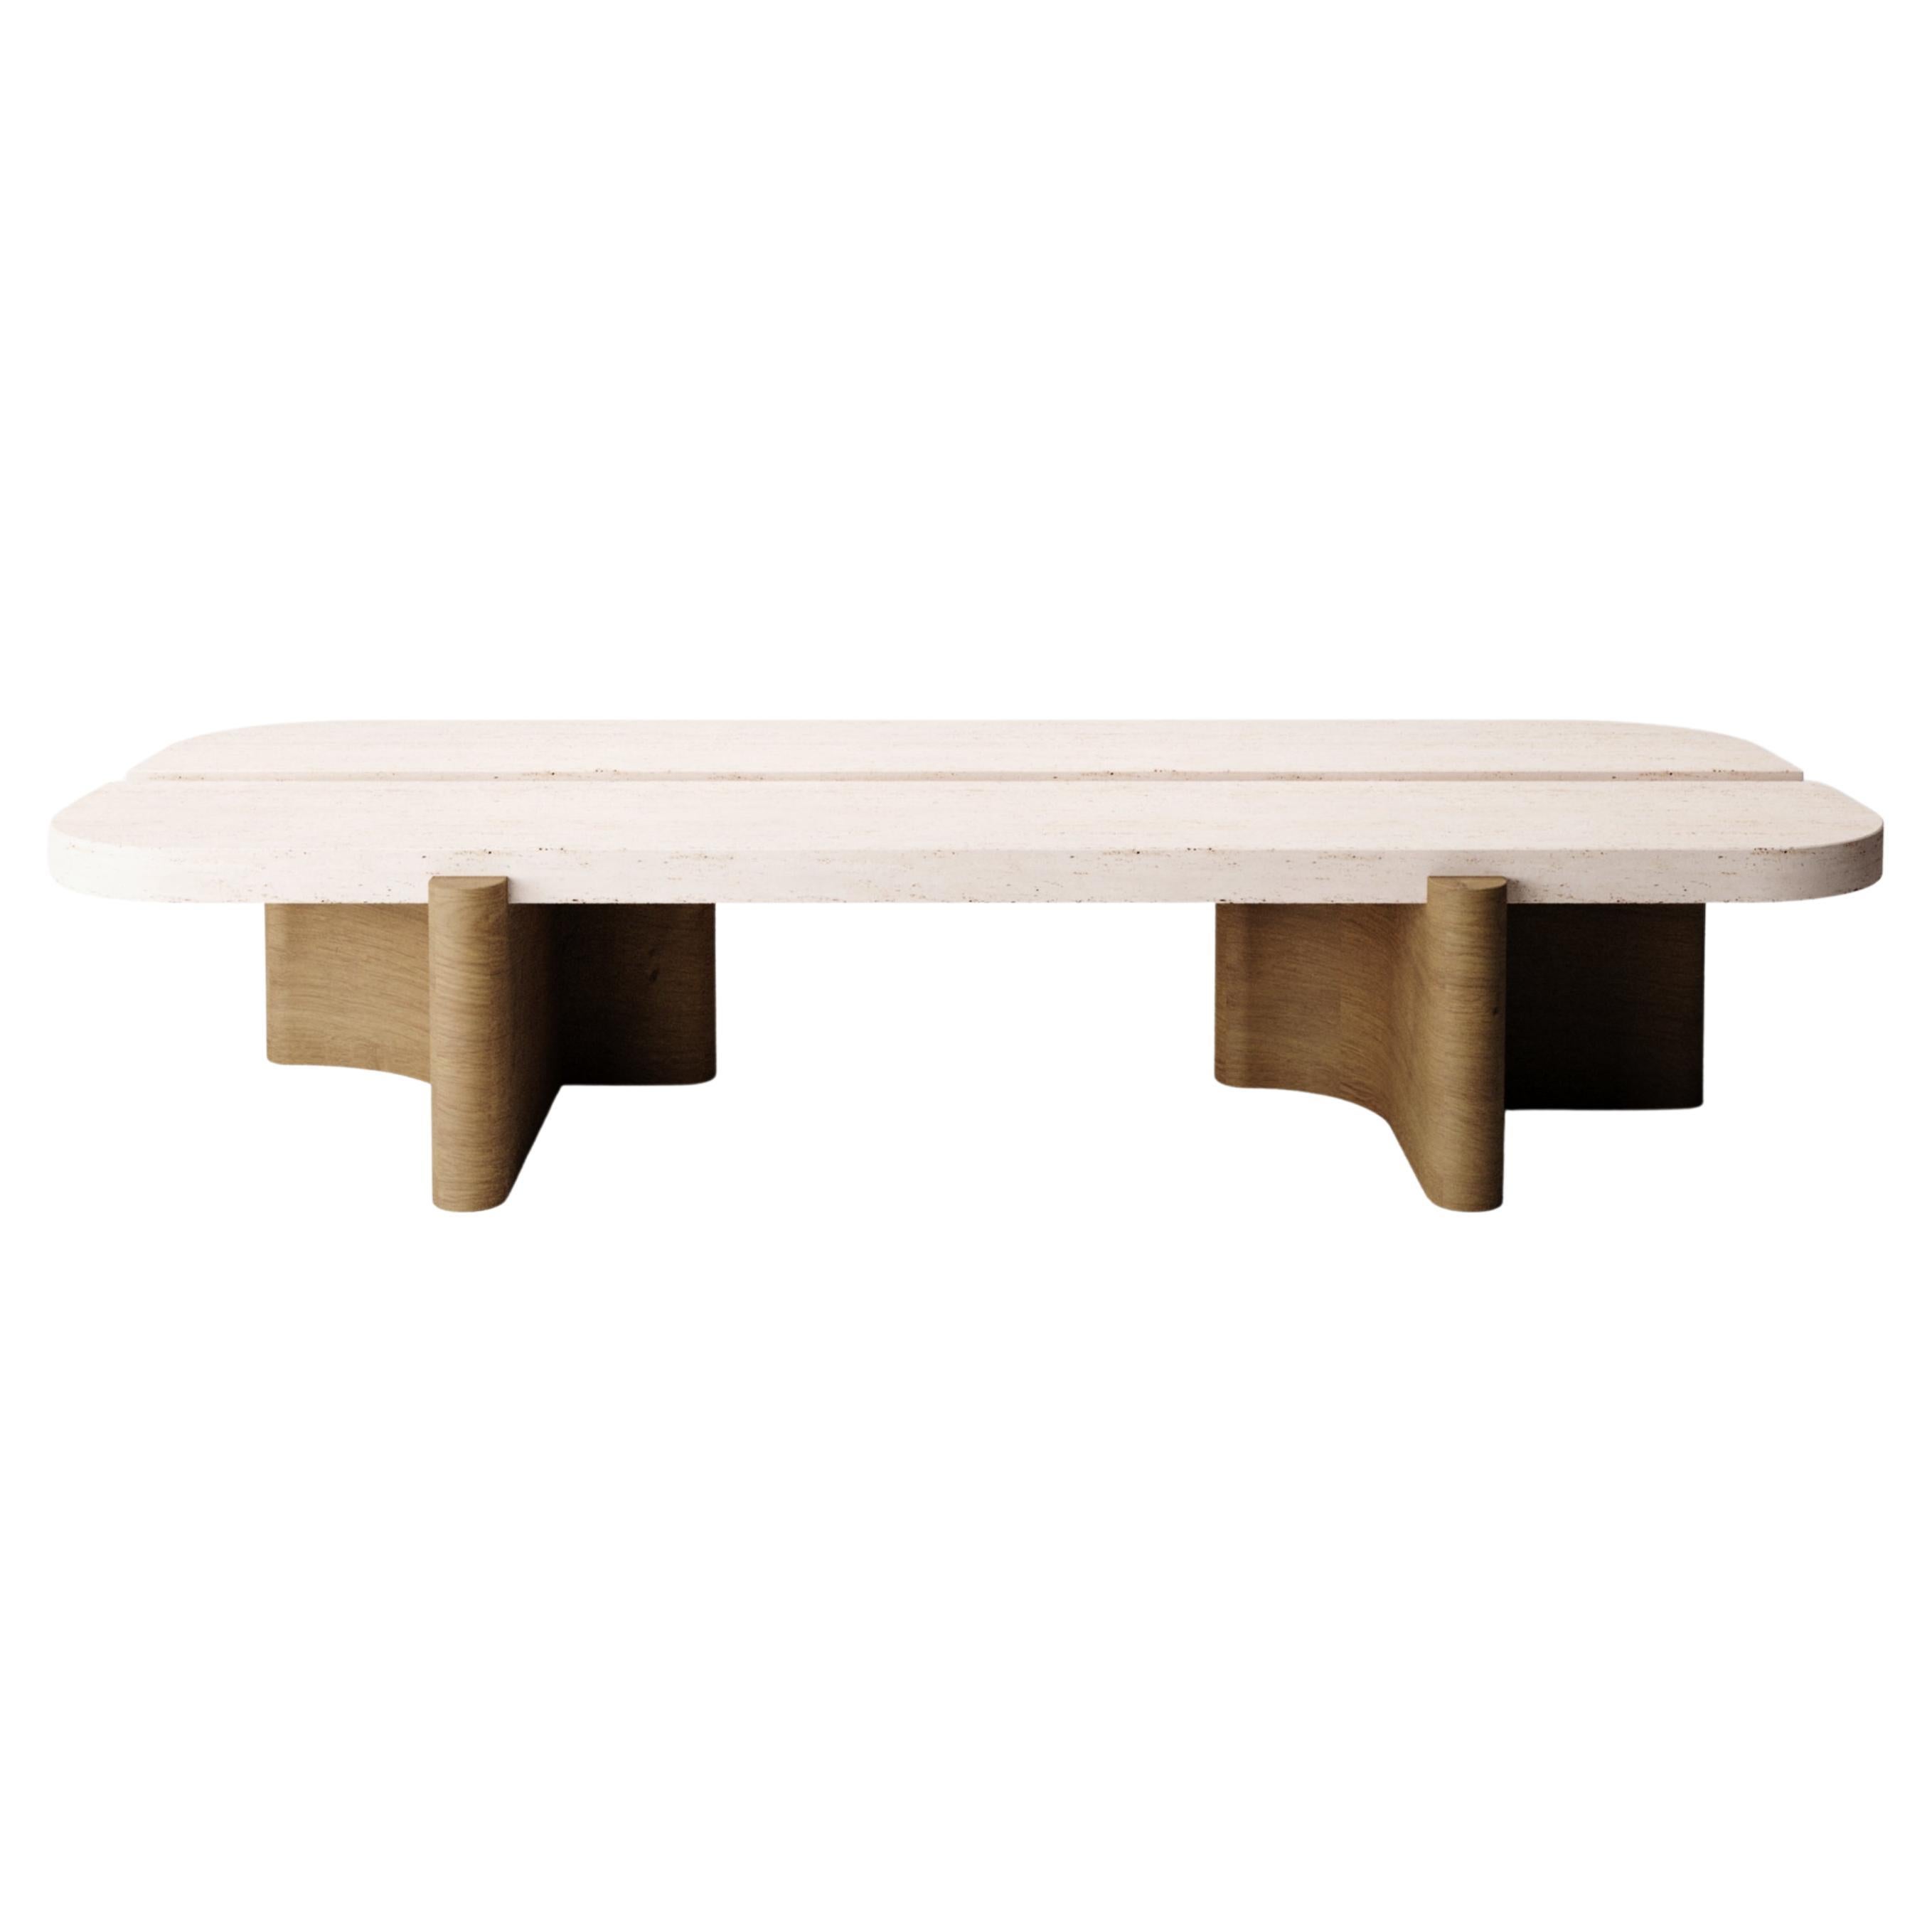 Collector -Designed by Studio Rig Riviera Center Table Smoked Oak and Travertino